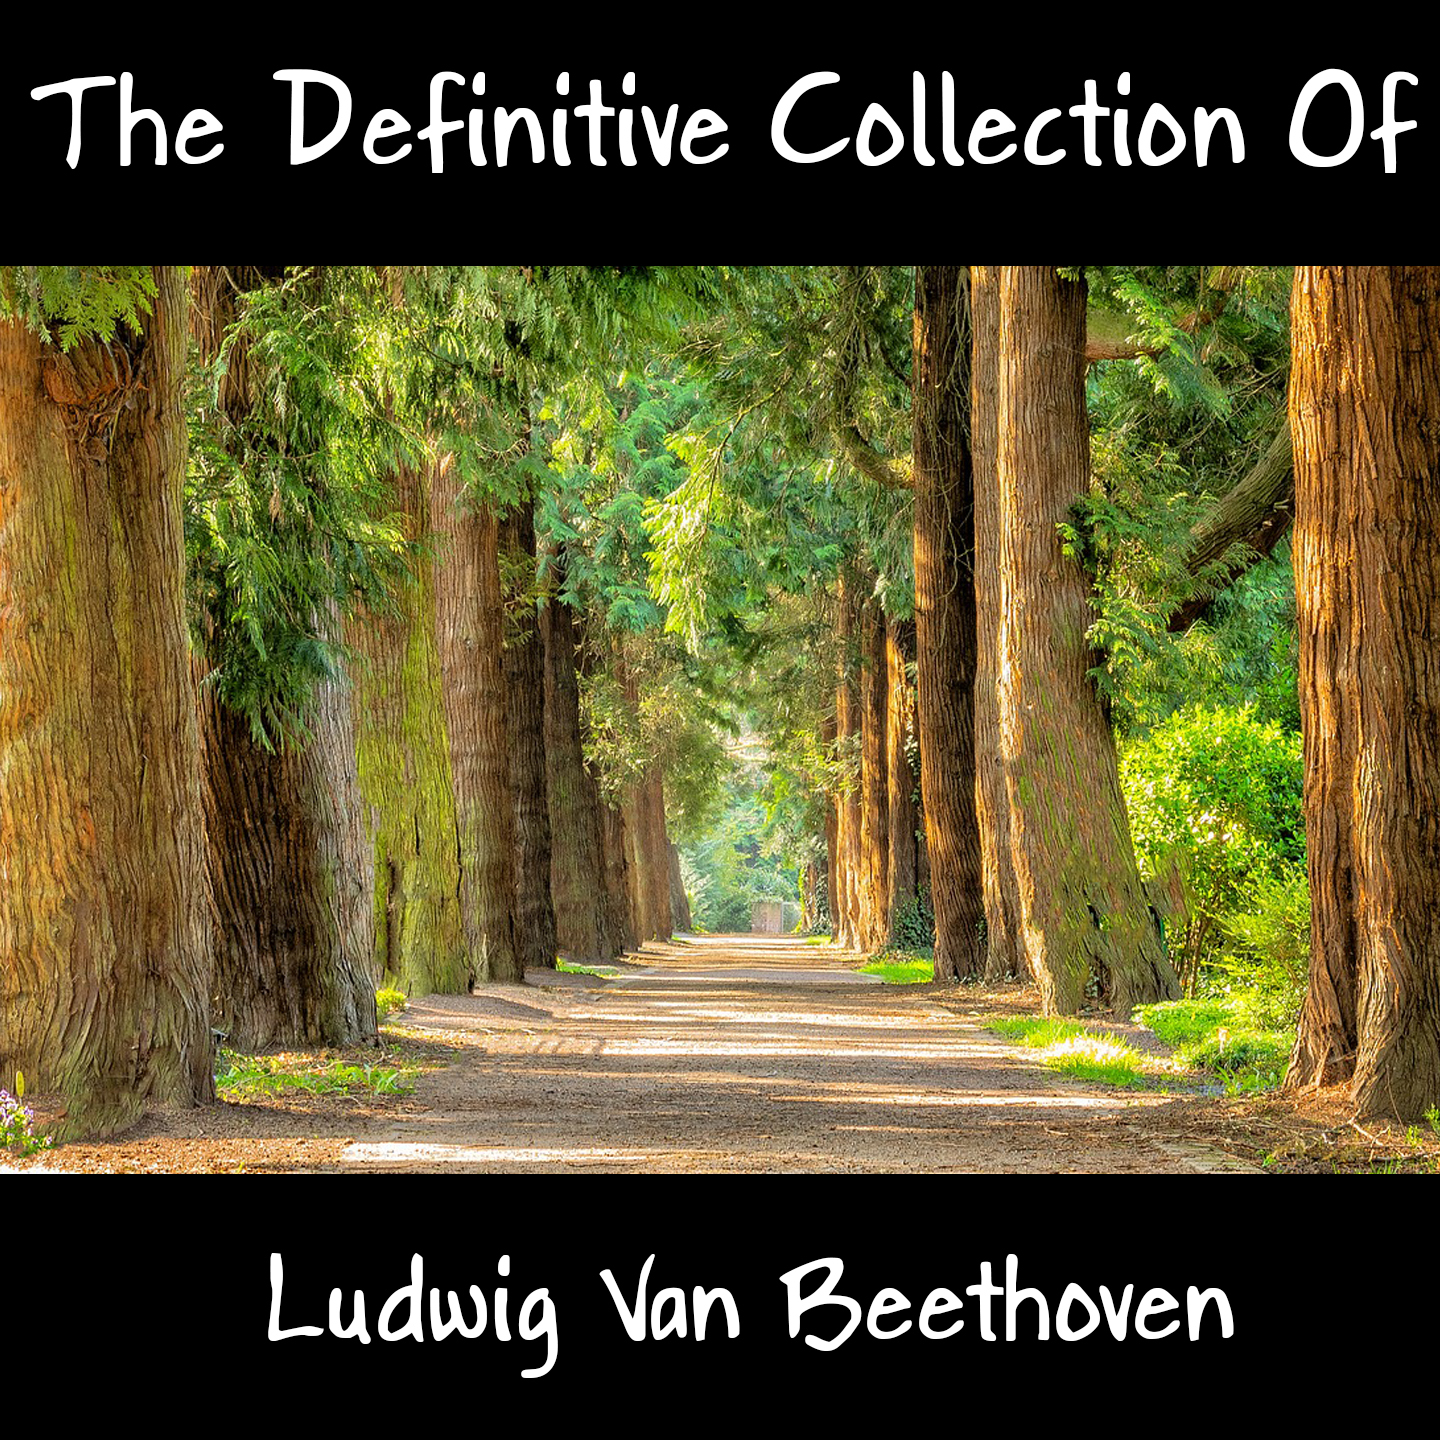 The Definitive Collection Of Ludwig Van Beethoven